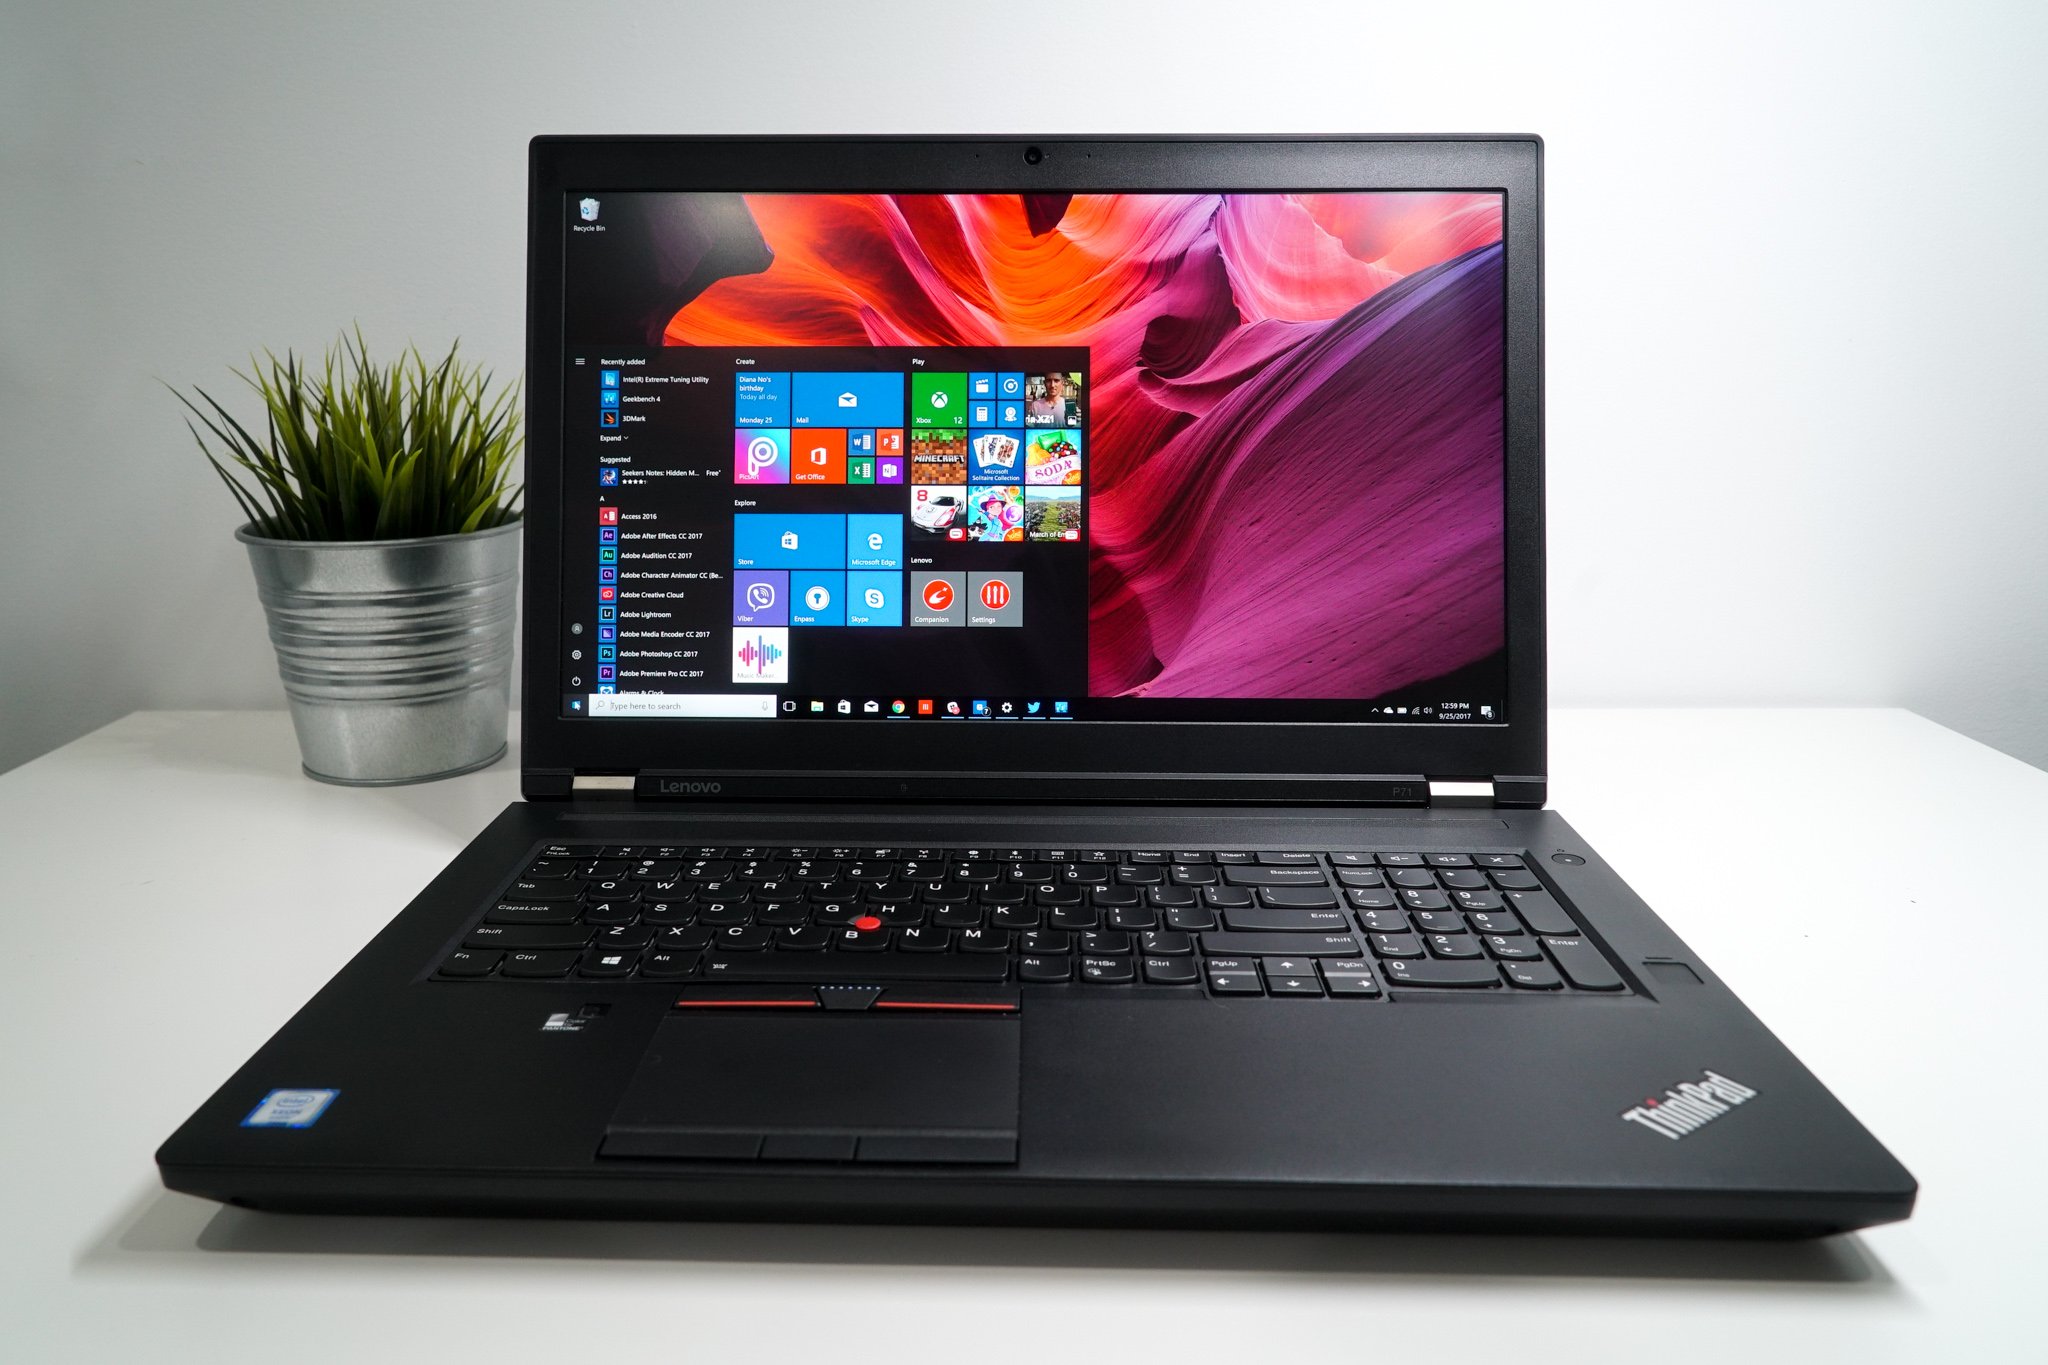 Lenovo ThinkPad P71 review: A massive laptop with specs to match | Windows Central